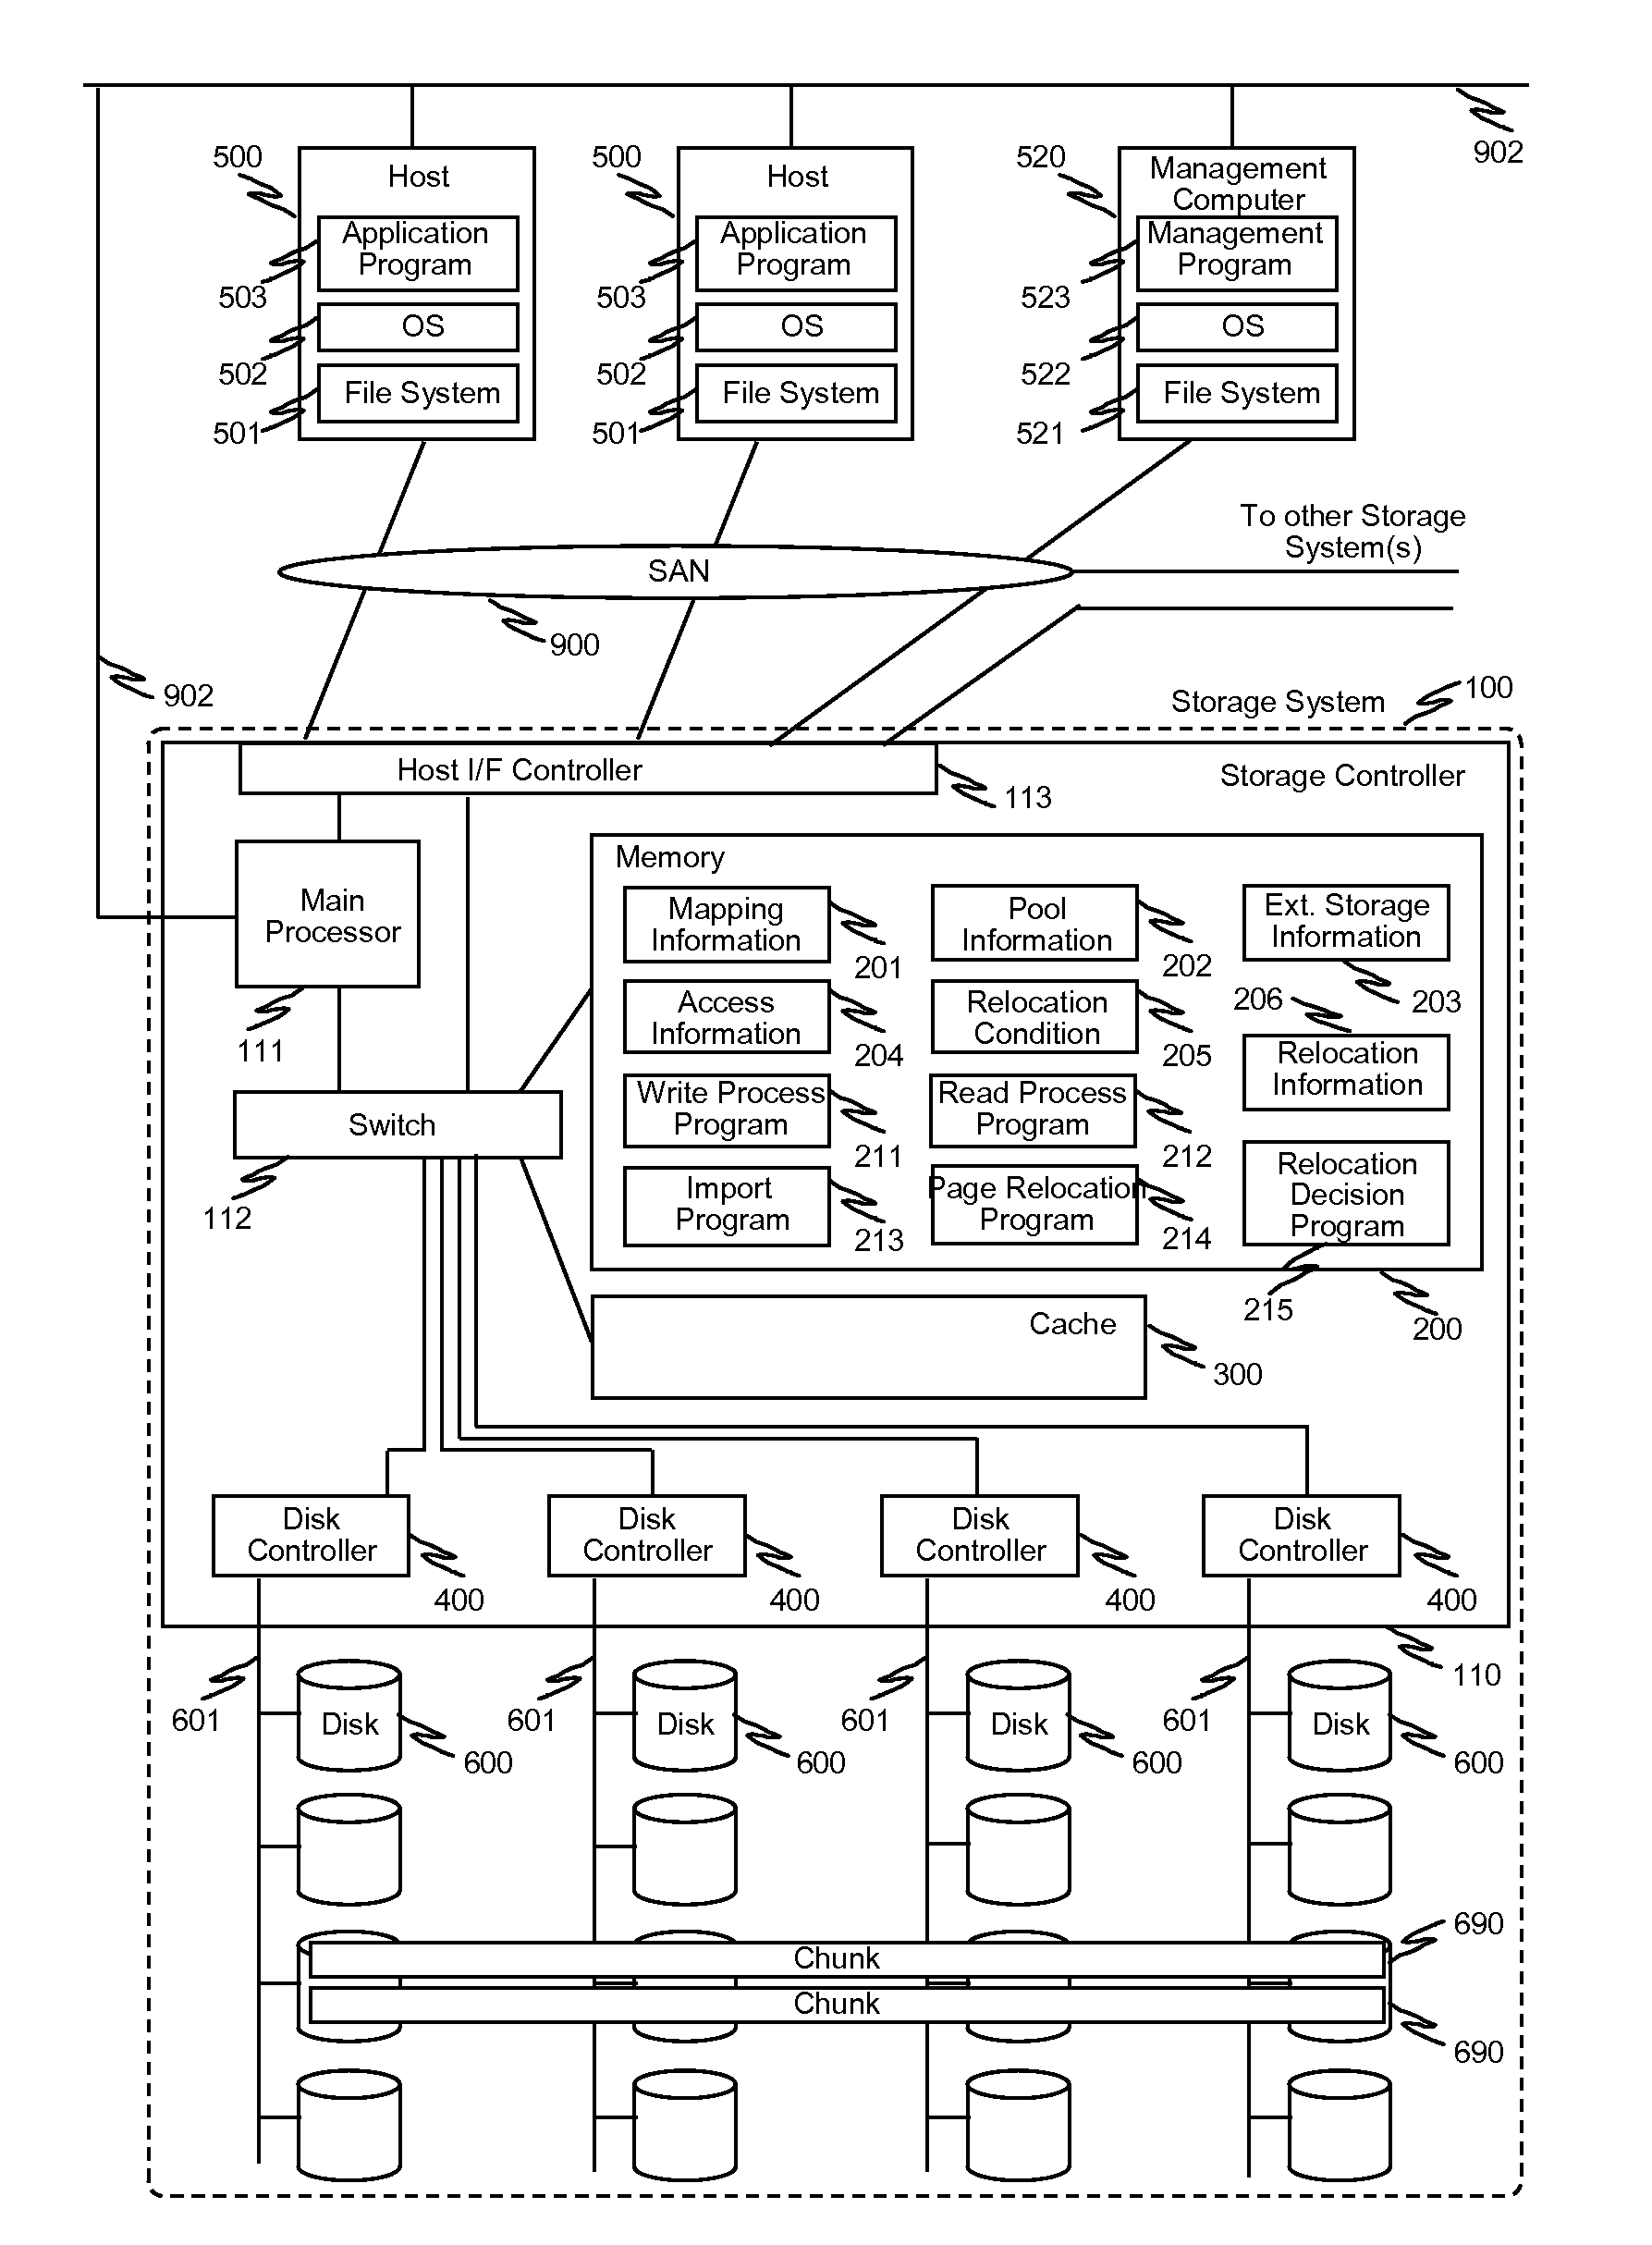 Methods and apparatus for migrating thin provisioning volumes between storage systems